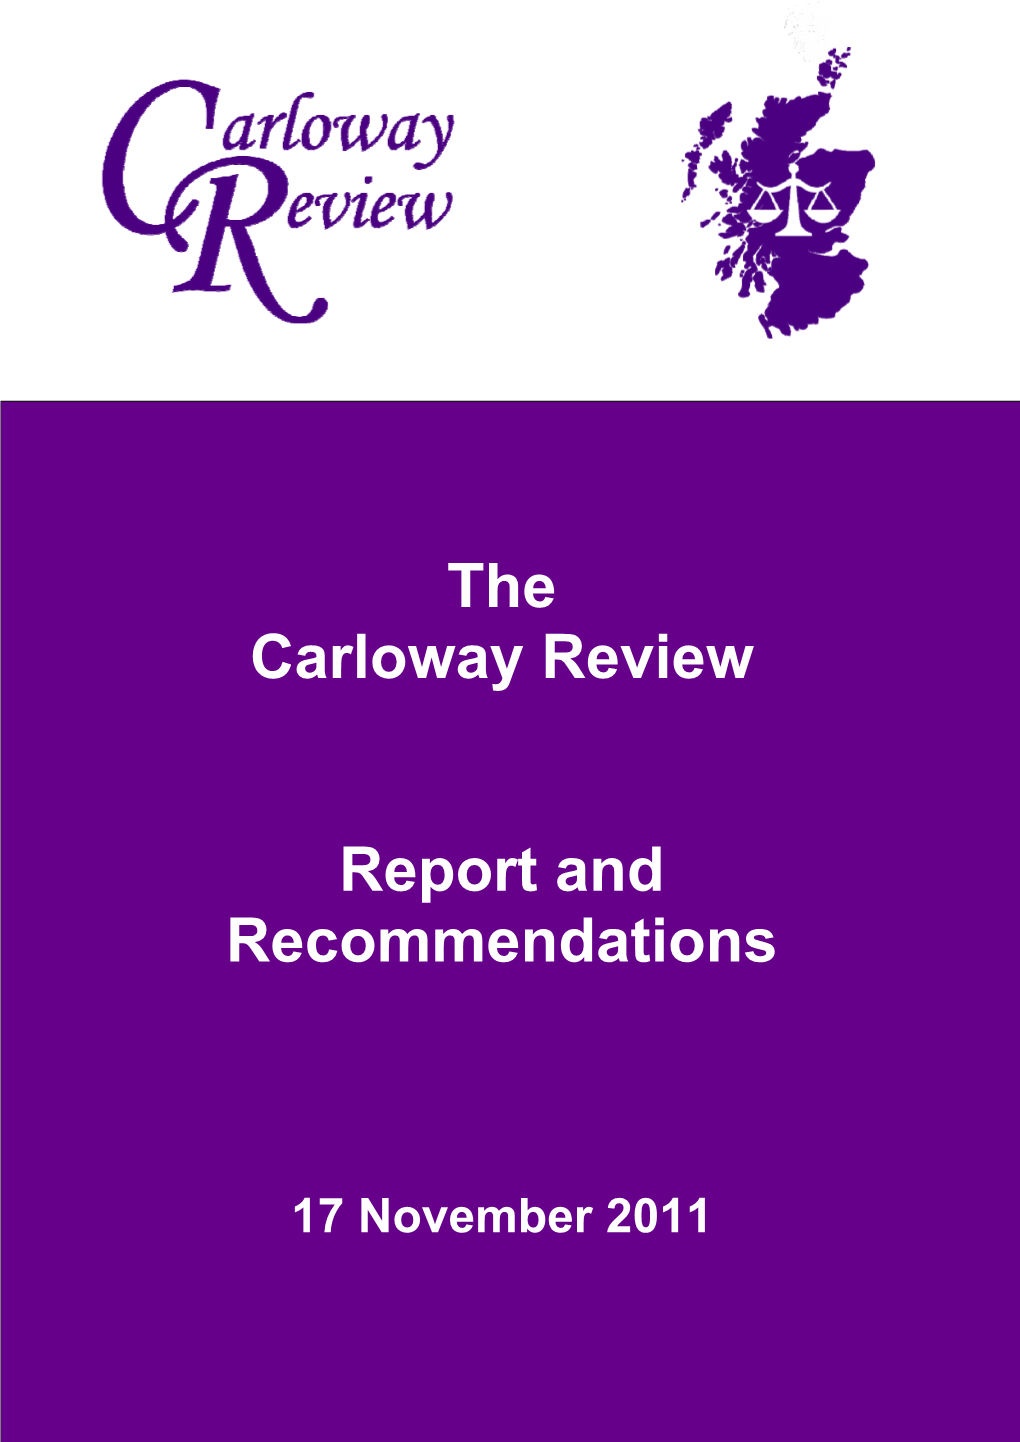 The Carloway Review Report and Recommendations